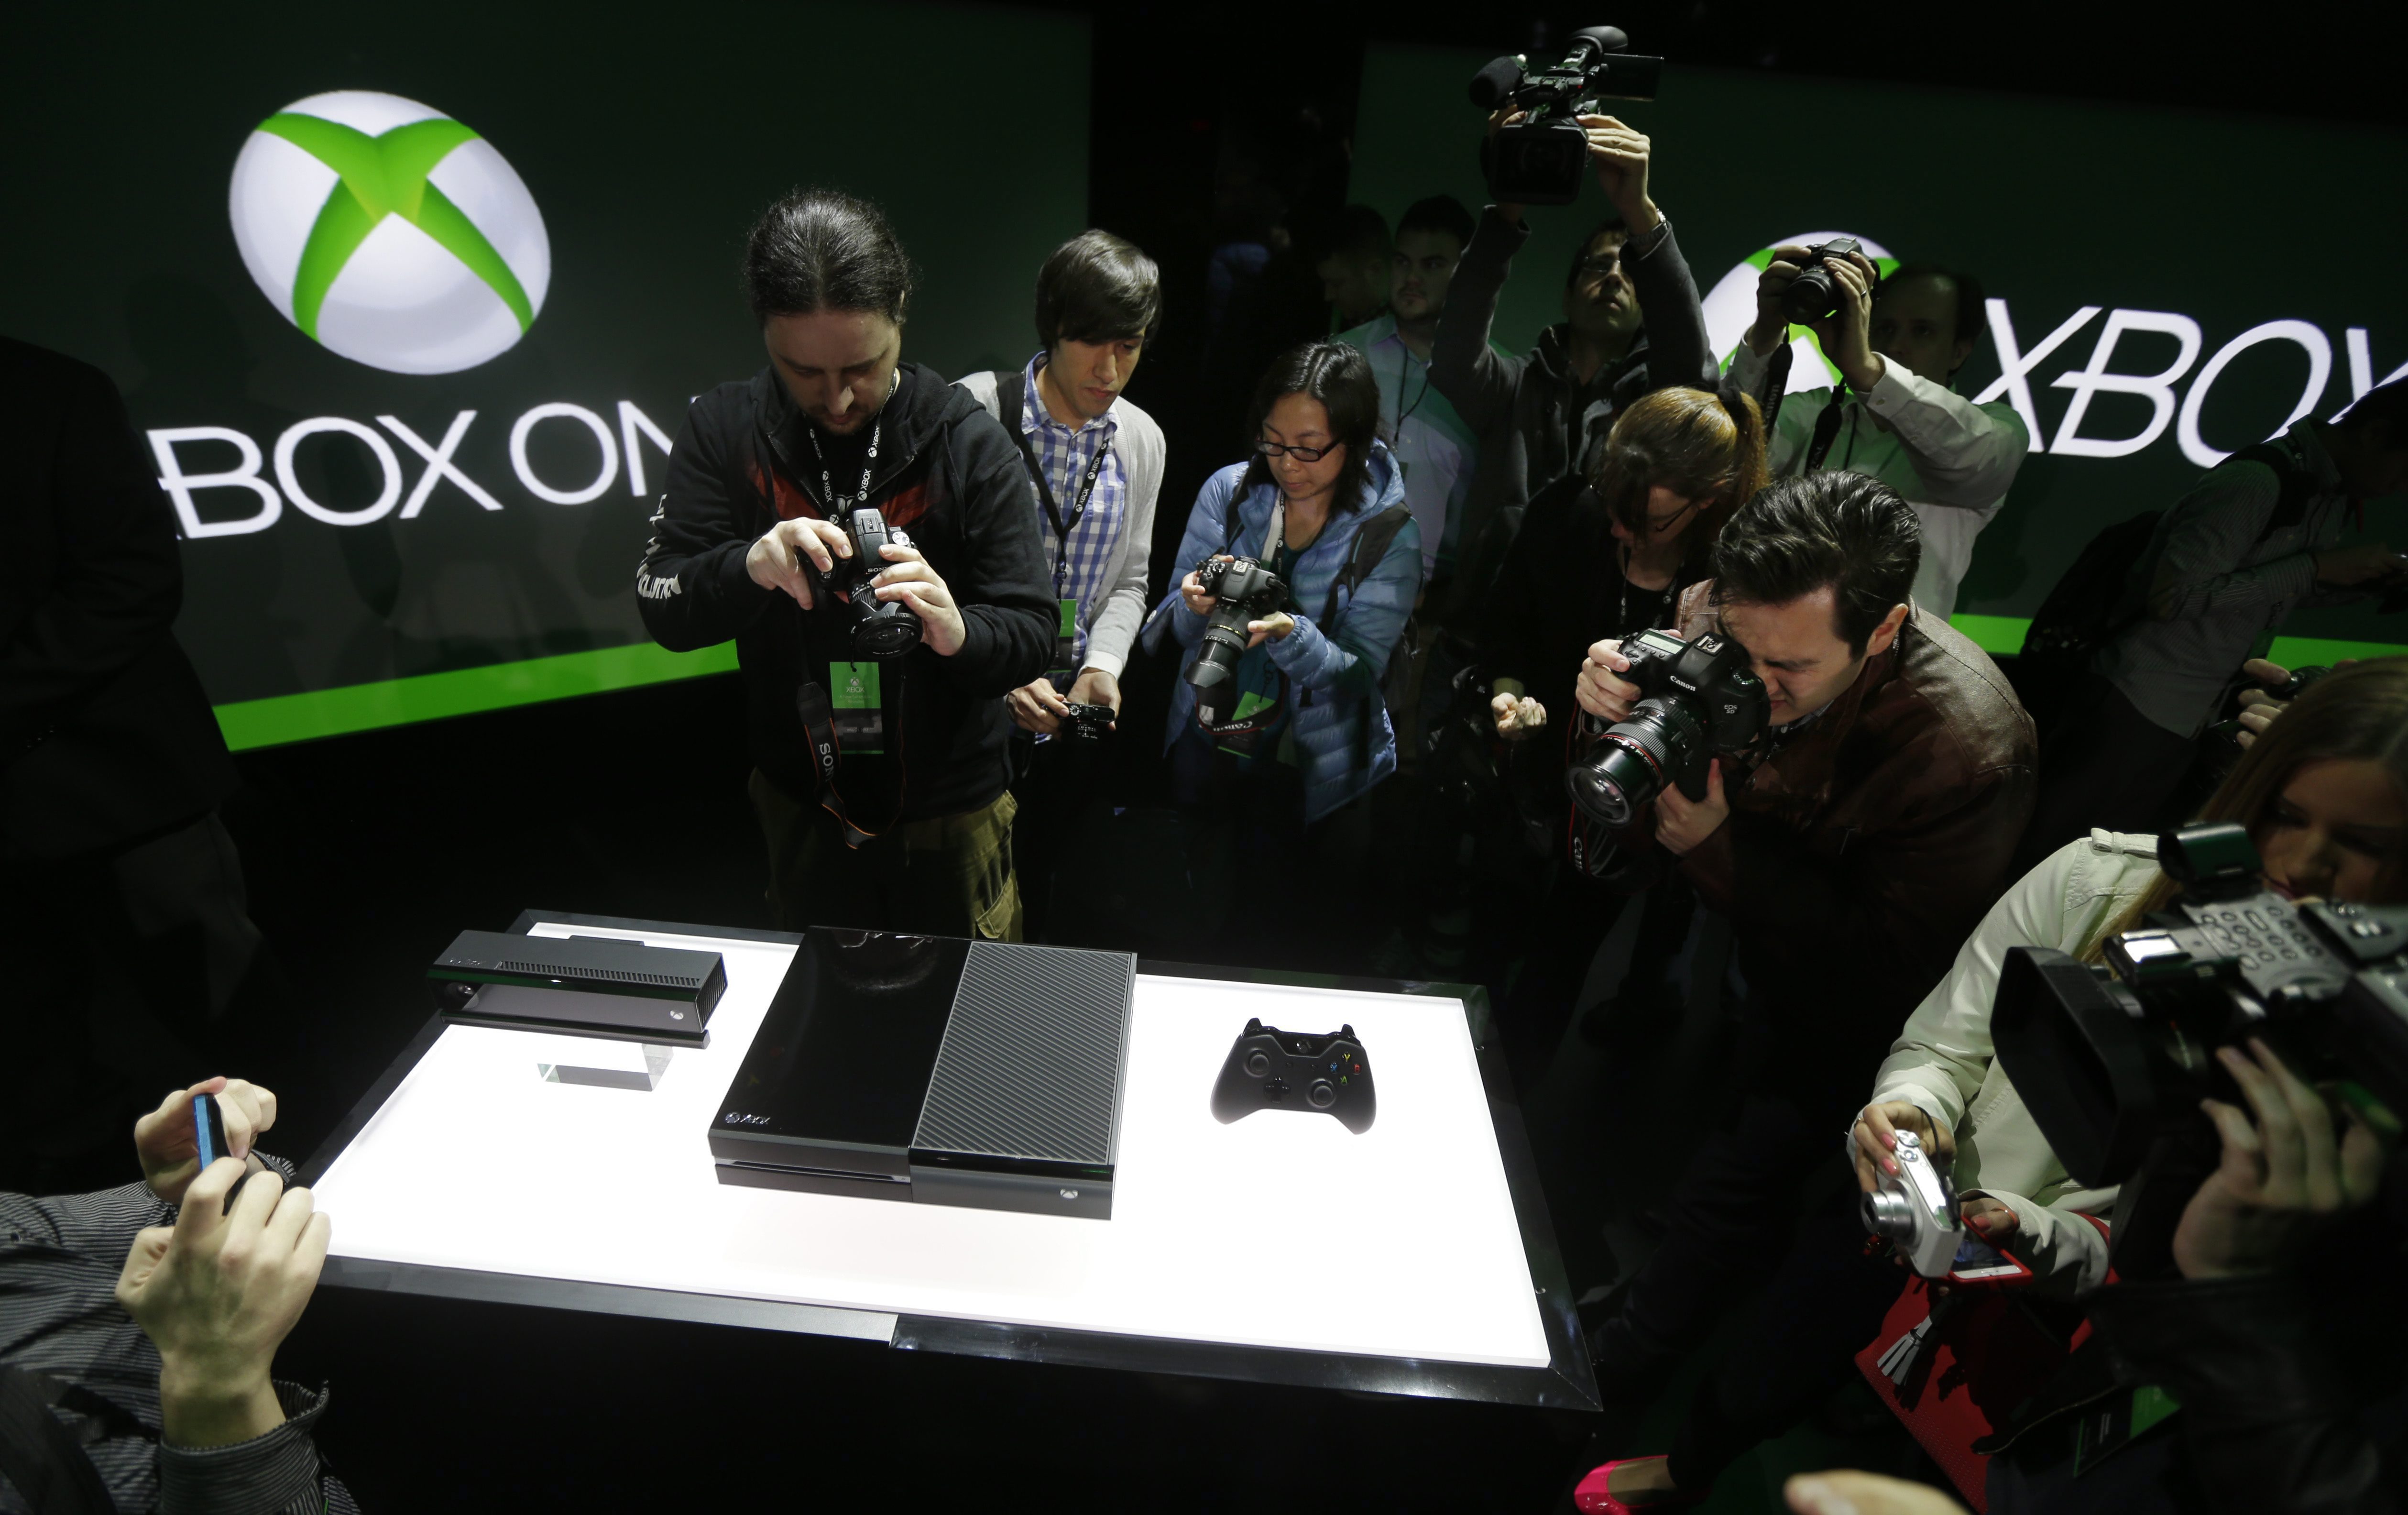 Xbox One Price Too High According to Pricing Expert